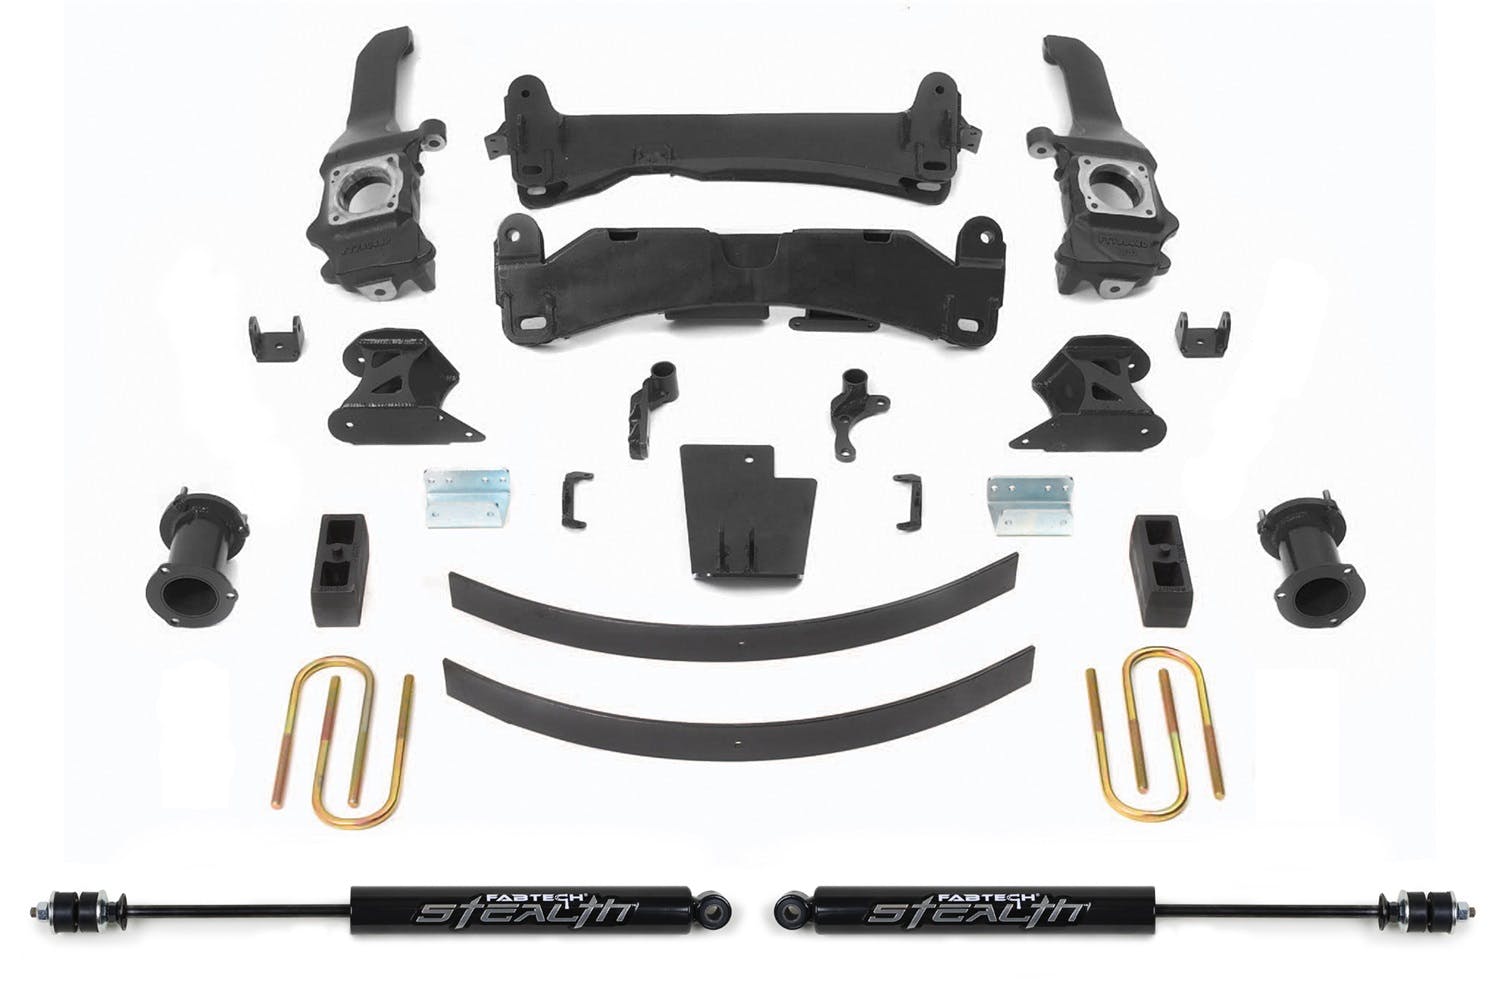 Fabtech K7047M 6in. BASIC SYS W/RR STEALTH 2016 TOYOTA TACOMA 4WD/2WD 6 LUG MODELS ONLY